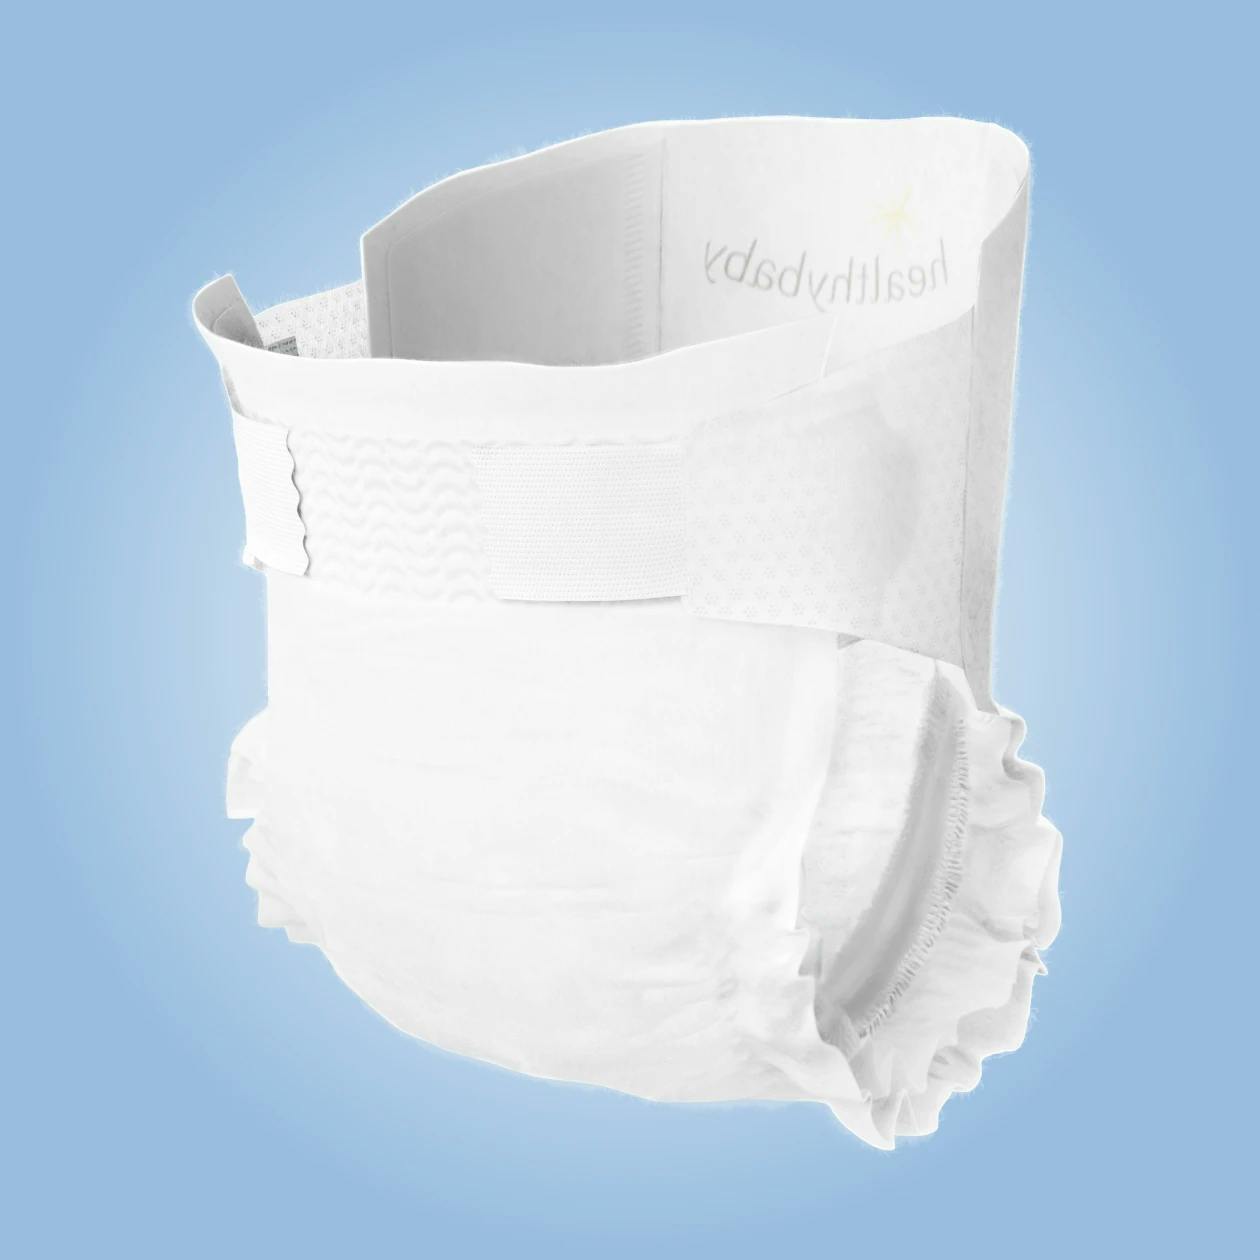 HealthyBaby Diapers – The Only EWG-Verified Diaper